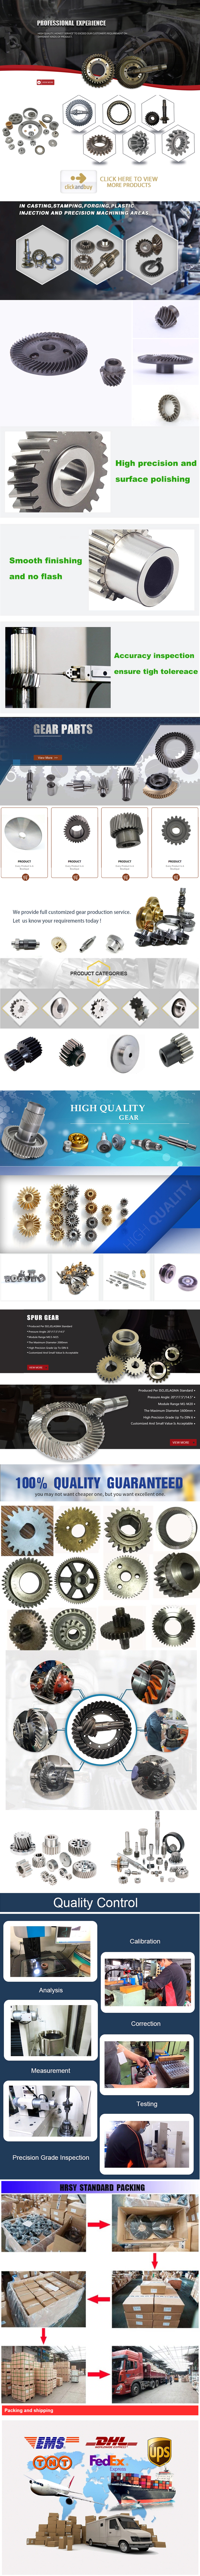   in Baku Azerbaijan  sales   price   shop   near me   near me shop   factory   supplier Machine Drive Machining Plastic Custom Toothed Cylindrical Spur Straight Gear manufacturer   best   Cost   Custom   Cheap   wholesaler 